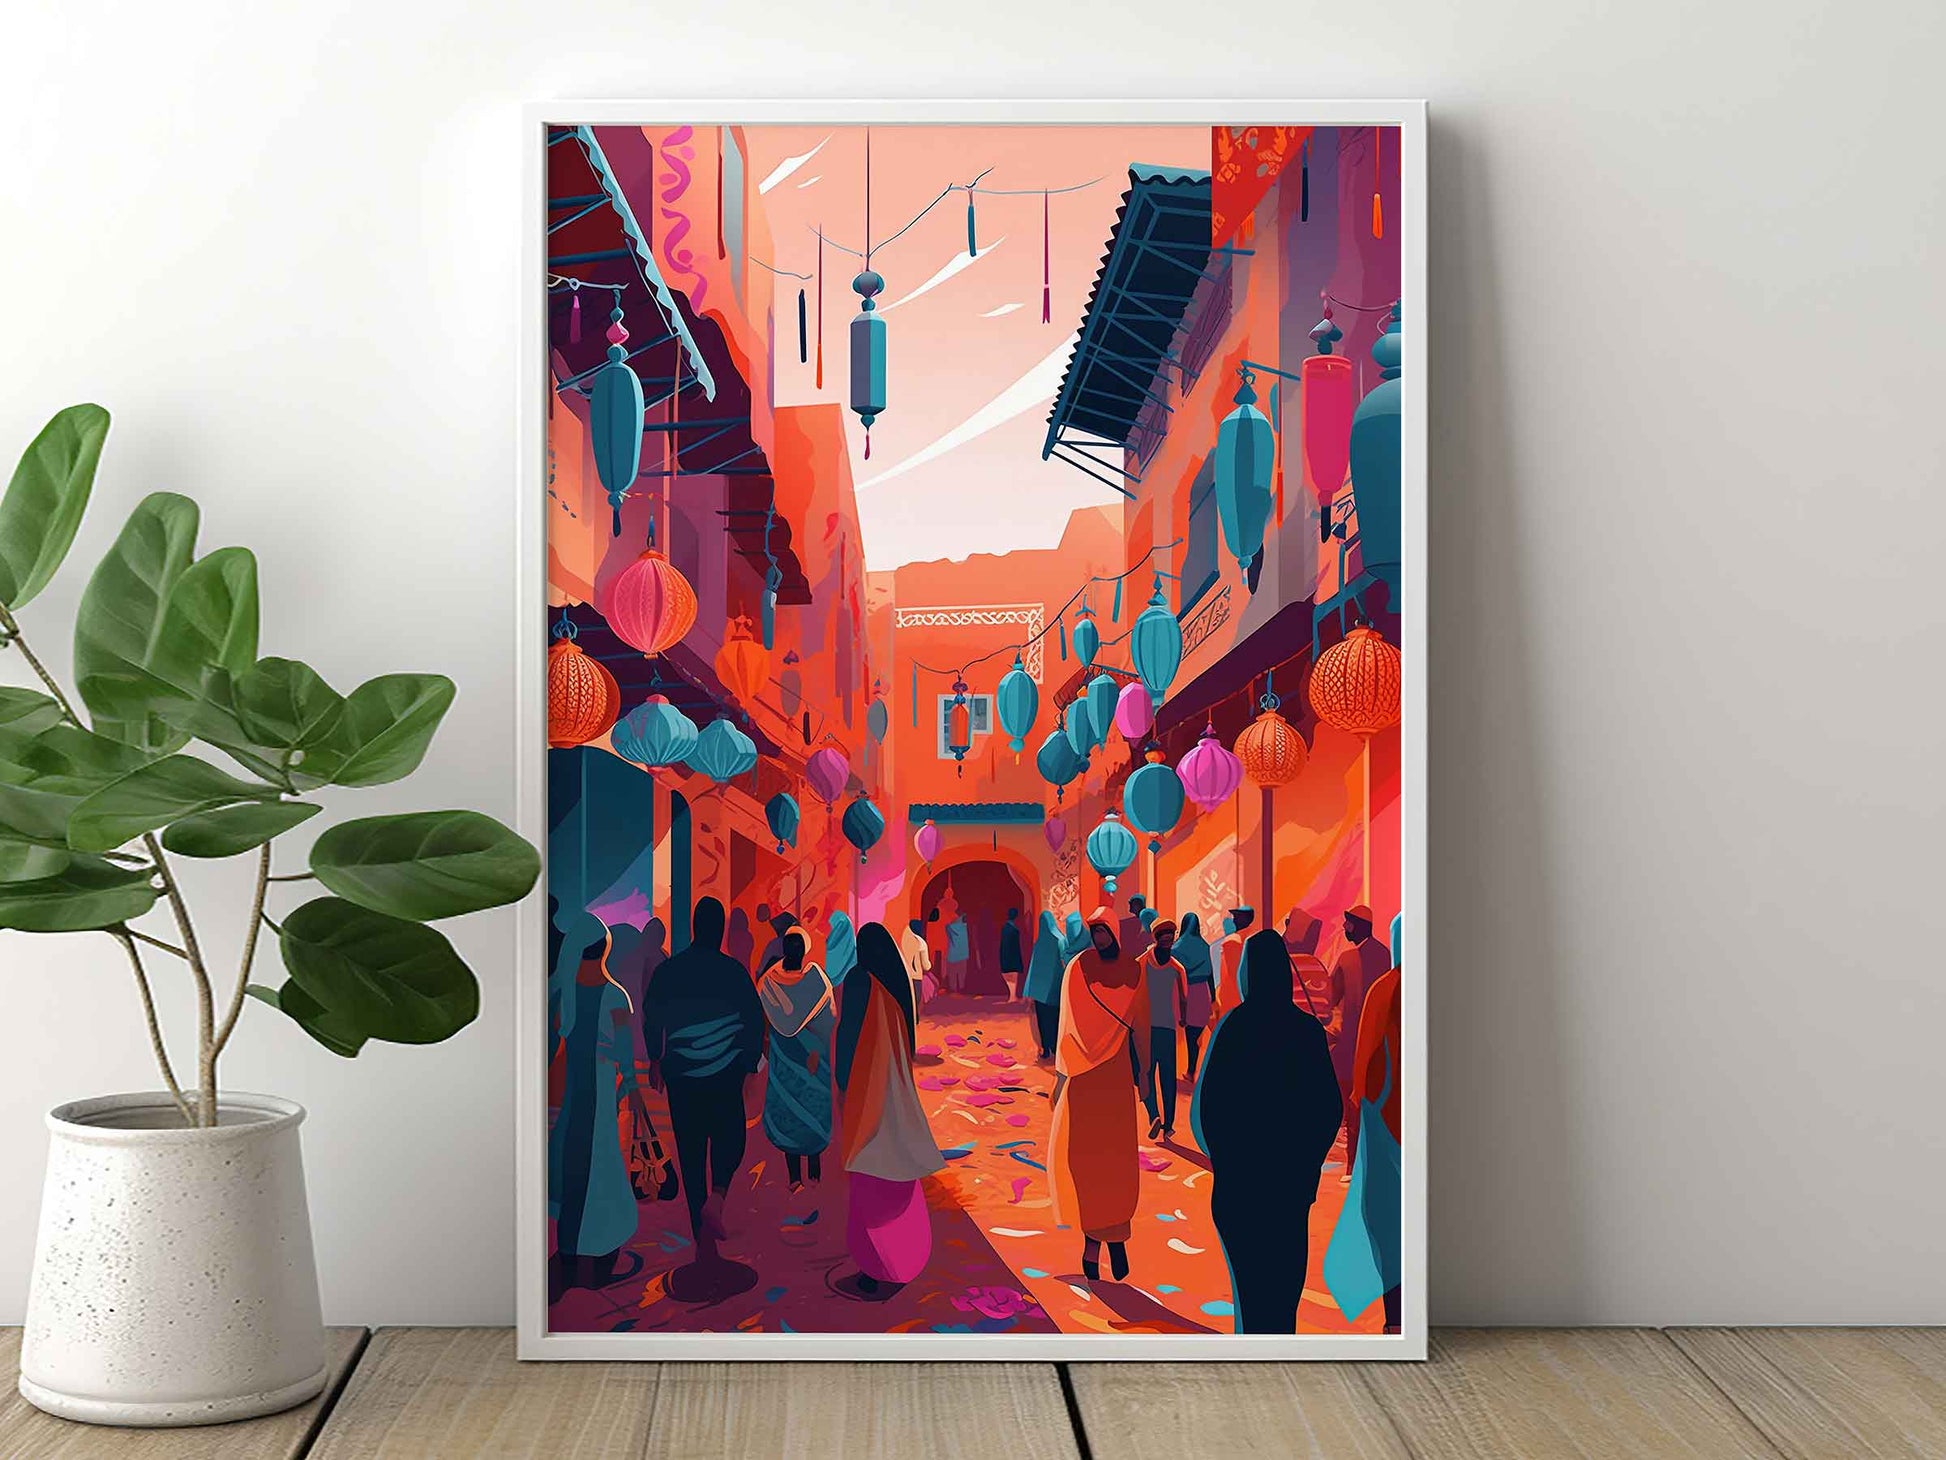 Framed Image of Moroccan Street Markets Abstract African Colourful Wall Art Prints